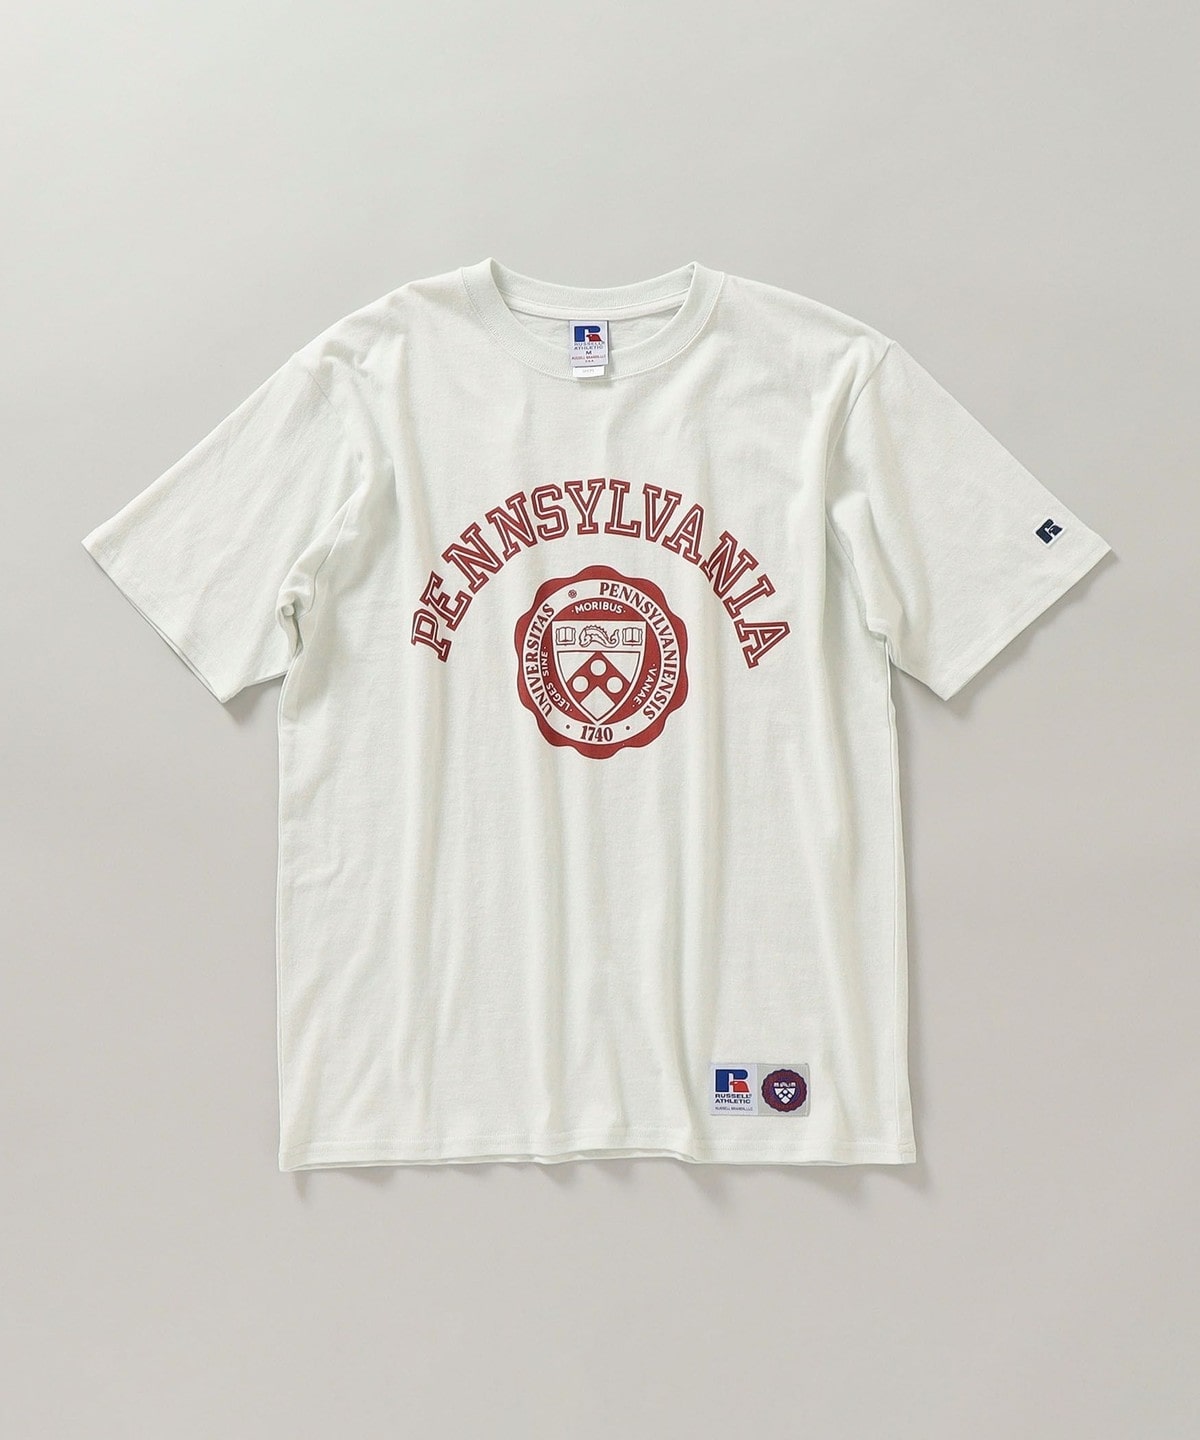 SHIPS別注】RUSSELL ATHLETIC: カレッジ プリント Tシャツ2: Tシャツ